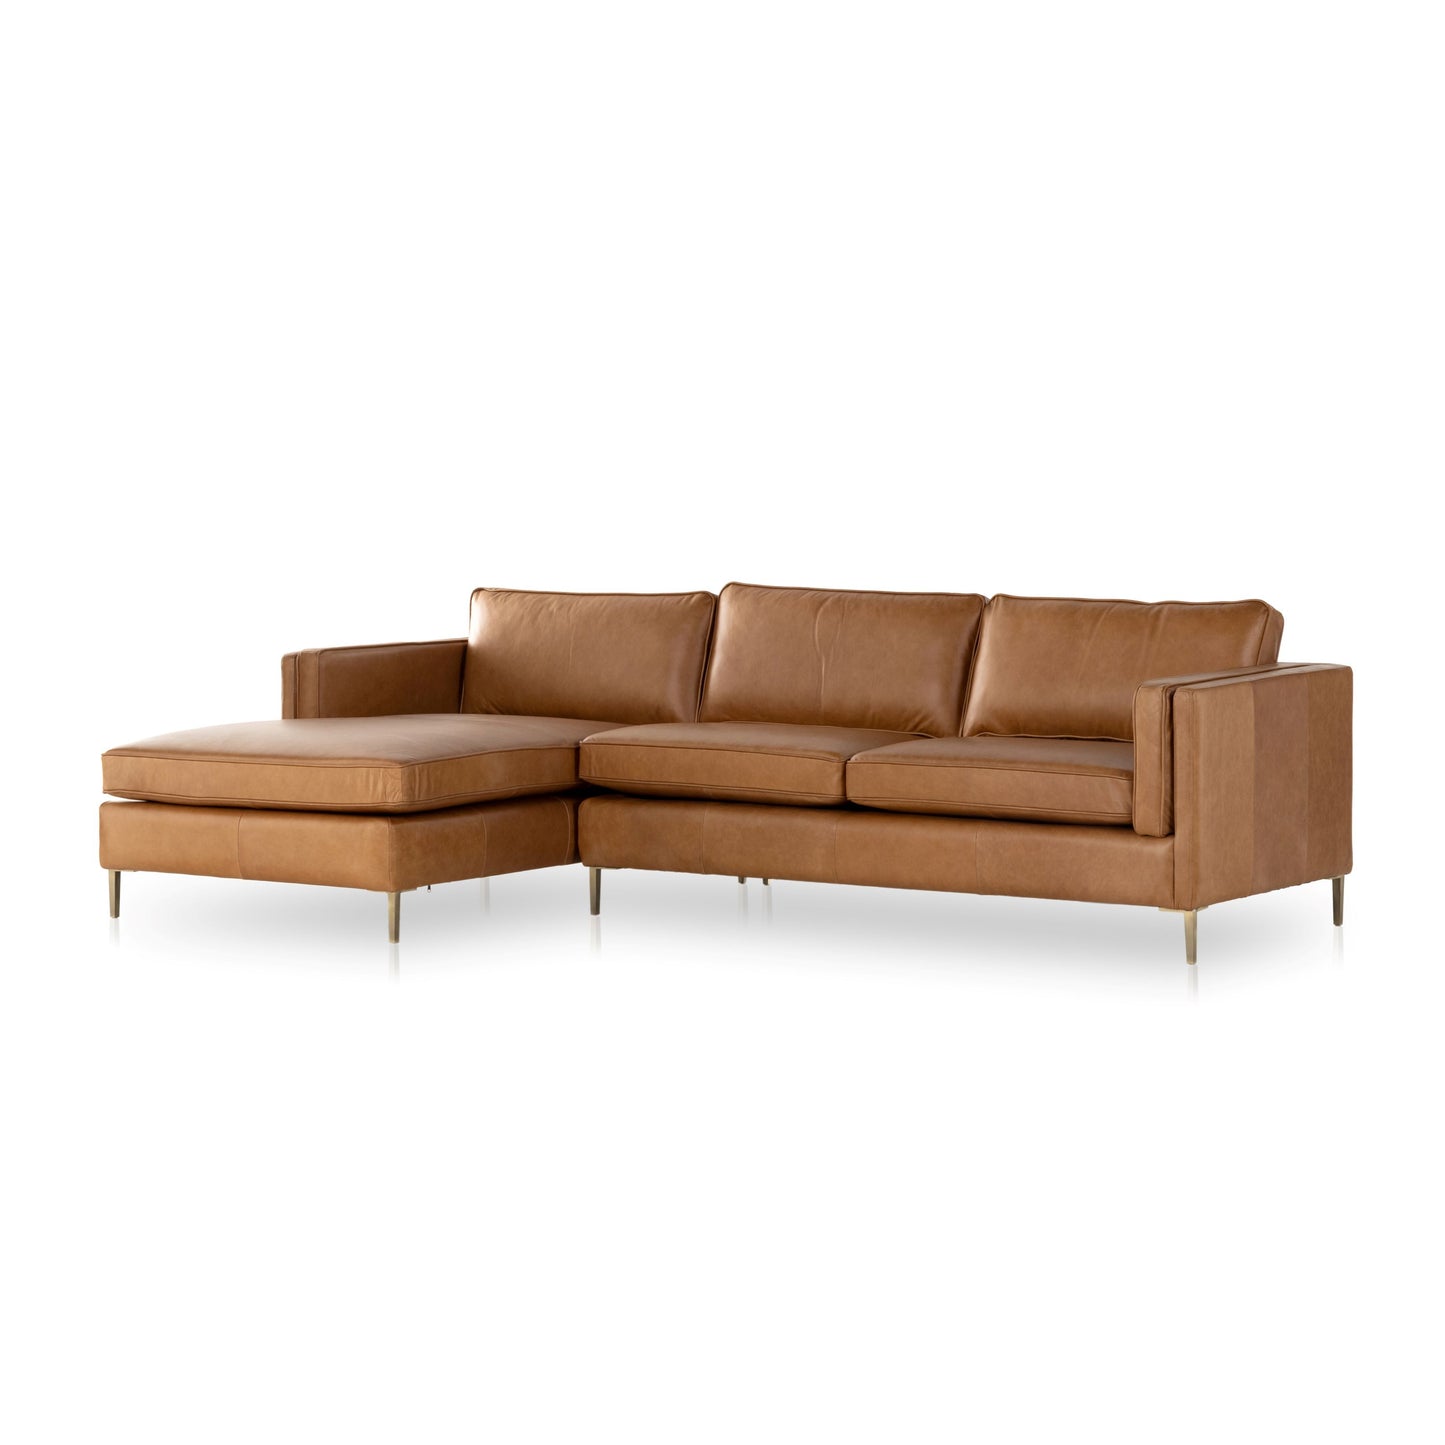 Emery 2pc Sectional Sonoma Butterscotch / Left FacingSectiona Sofa Four Hands  Sonoma Butterscotch Left Facing  Four Hands, Mid Century Modern Furniture, Old Bones Furniture Company, Old Bones Co, Modern Mid Century, Designer Furniture, https://www.oldbonesco.com/